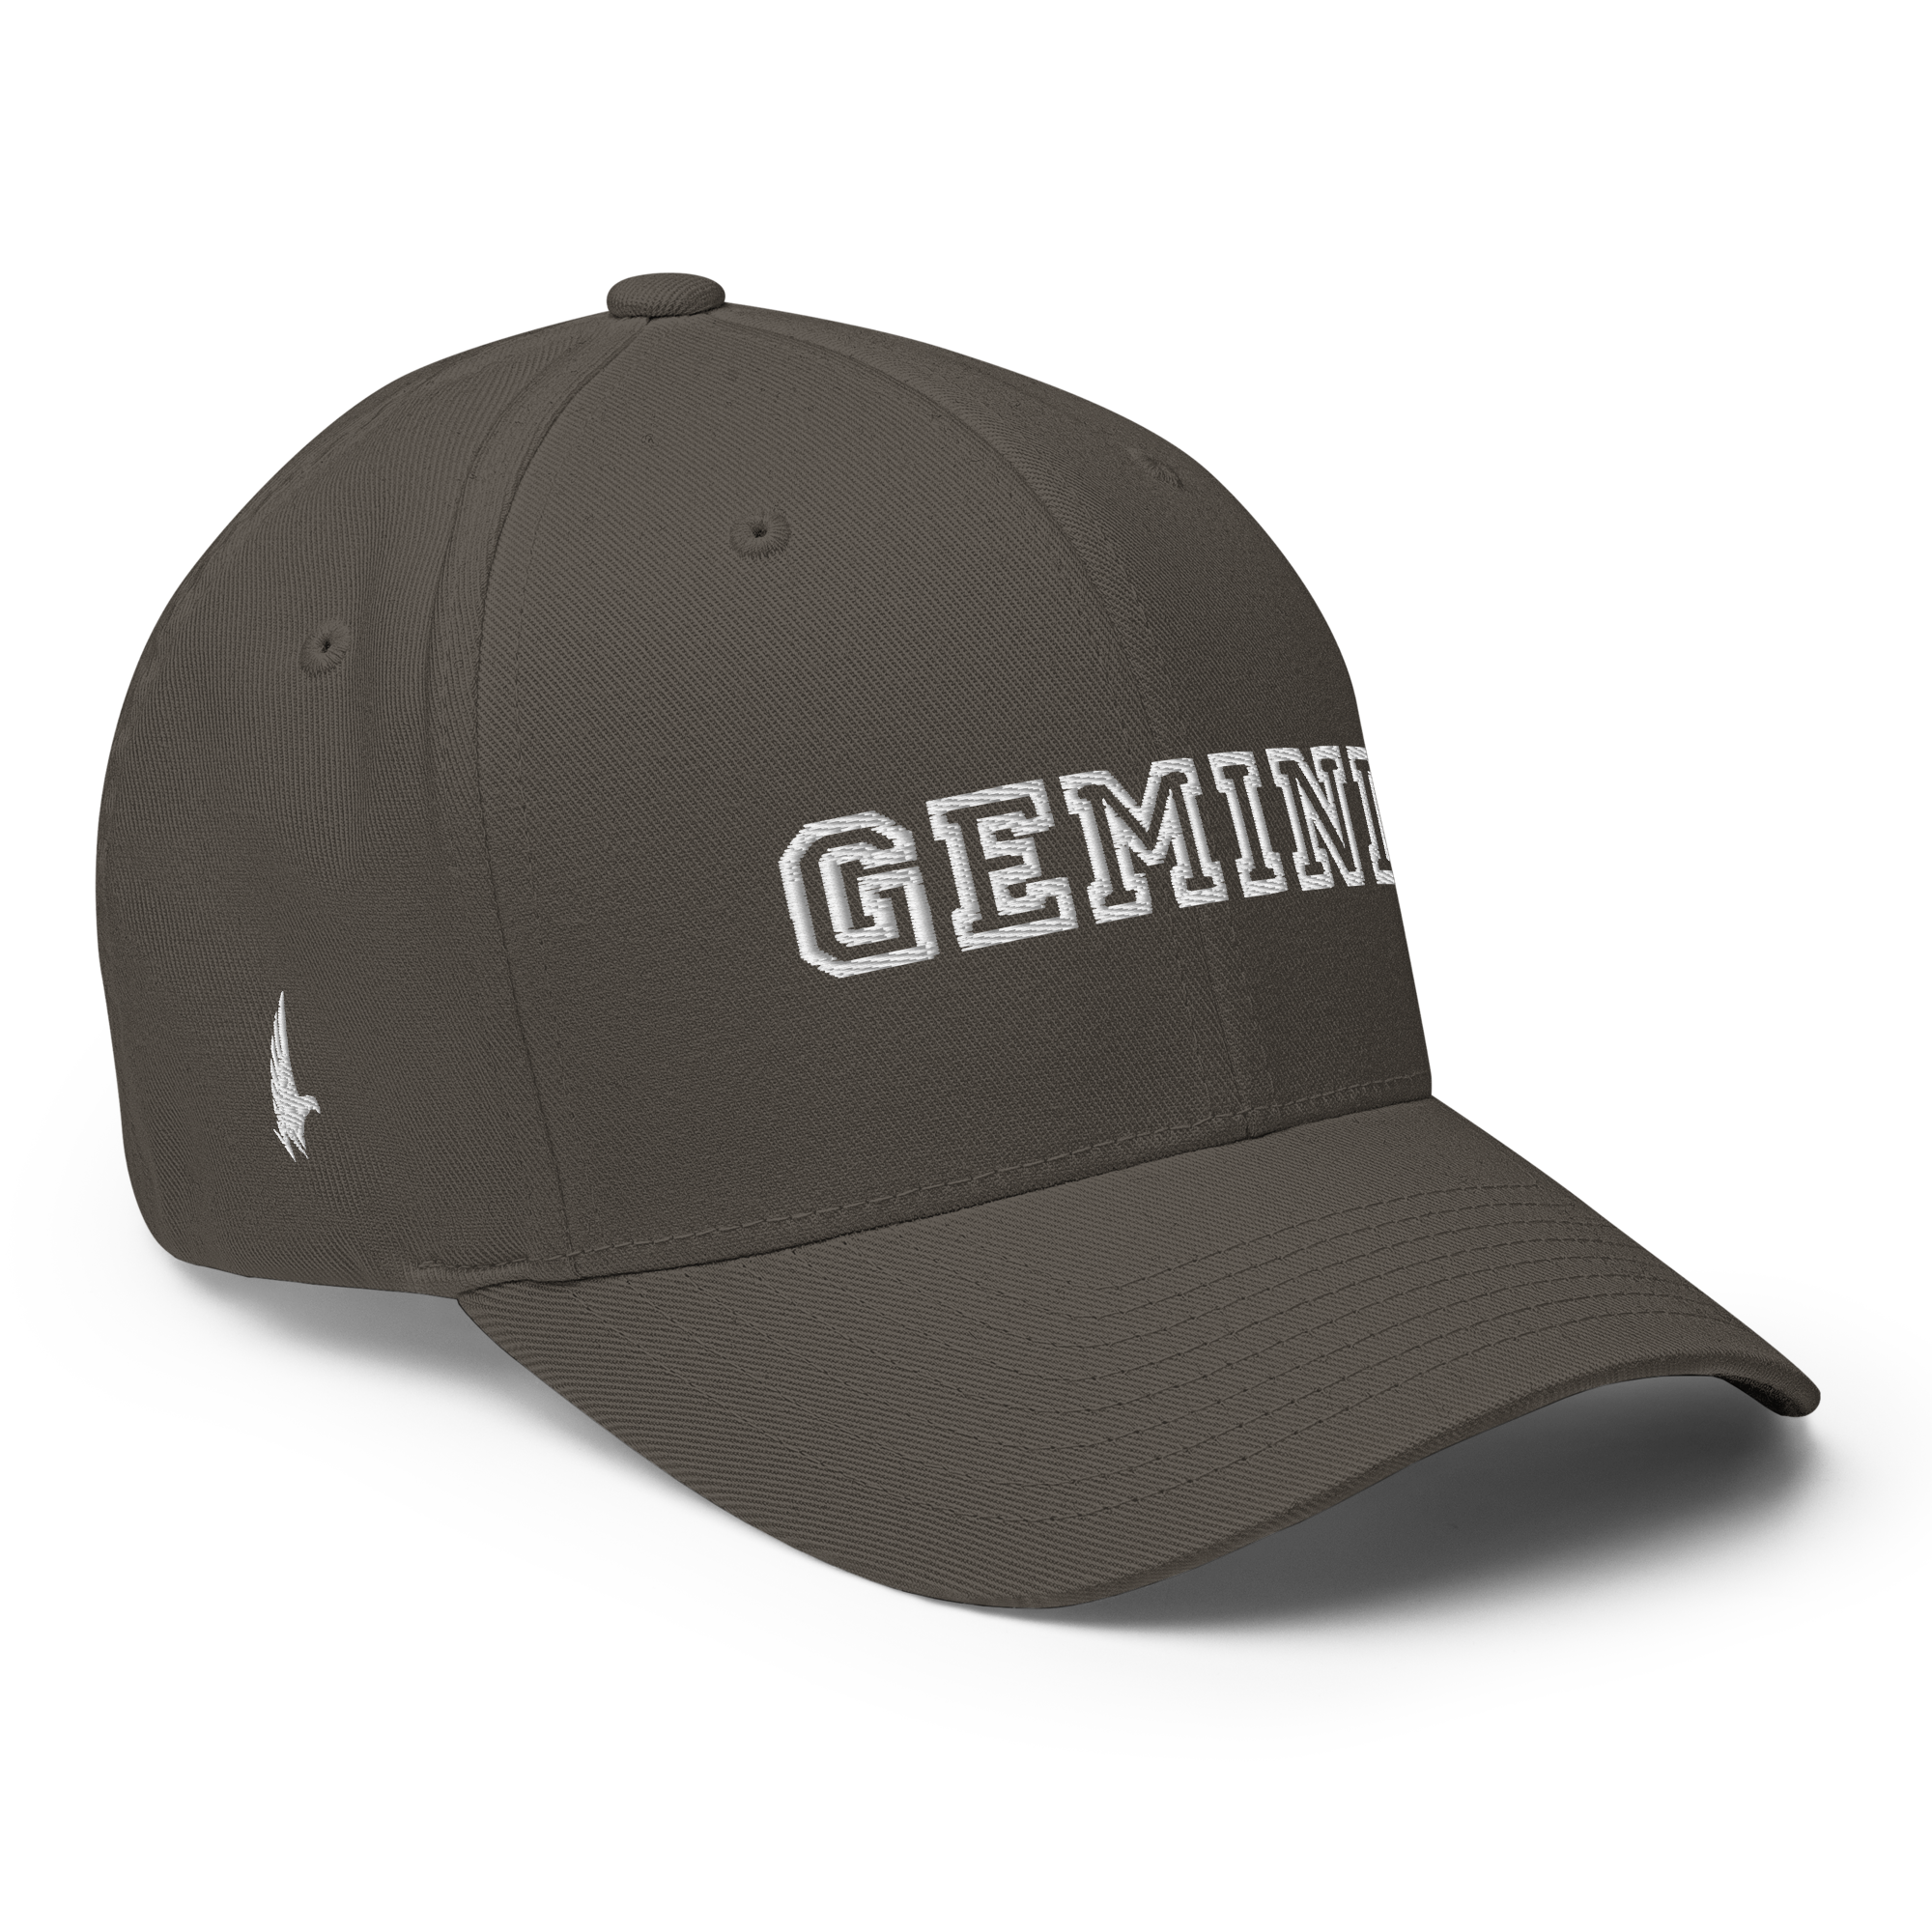 Gemini Legacy Fitted Hat Charcoal Gray White - Loyalty Vibes